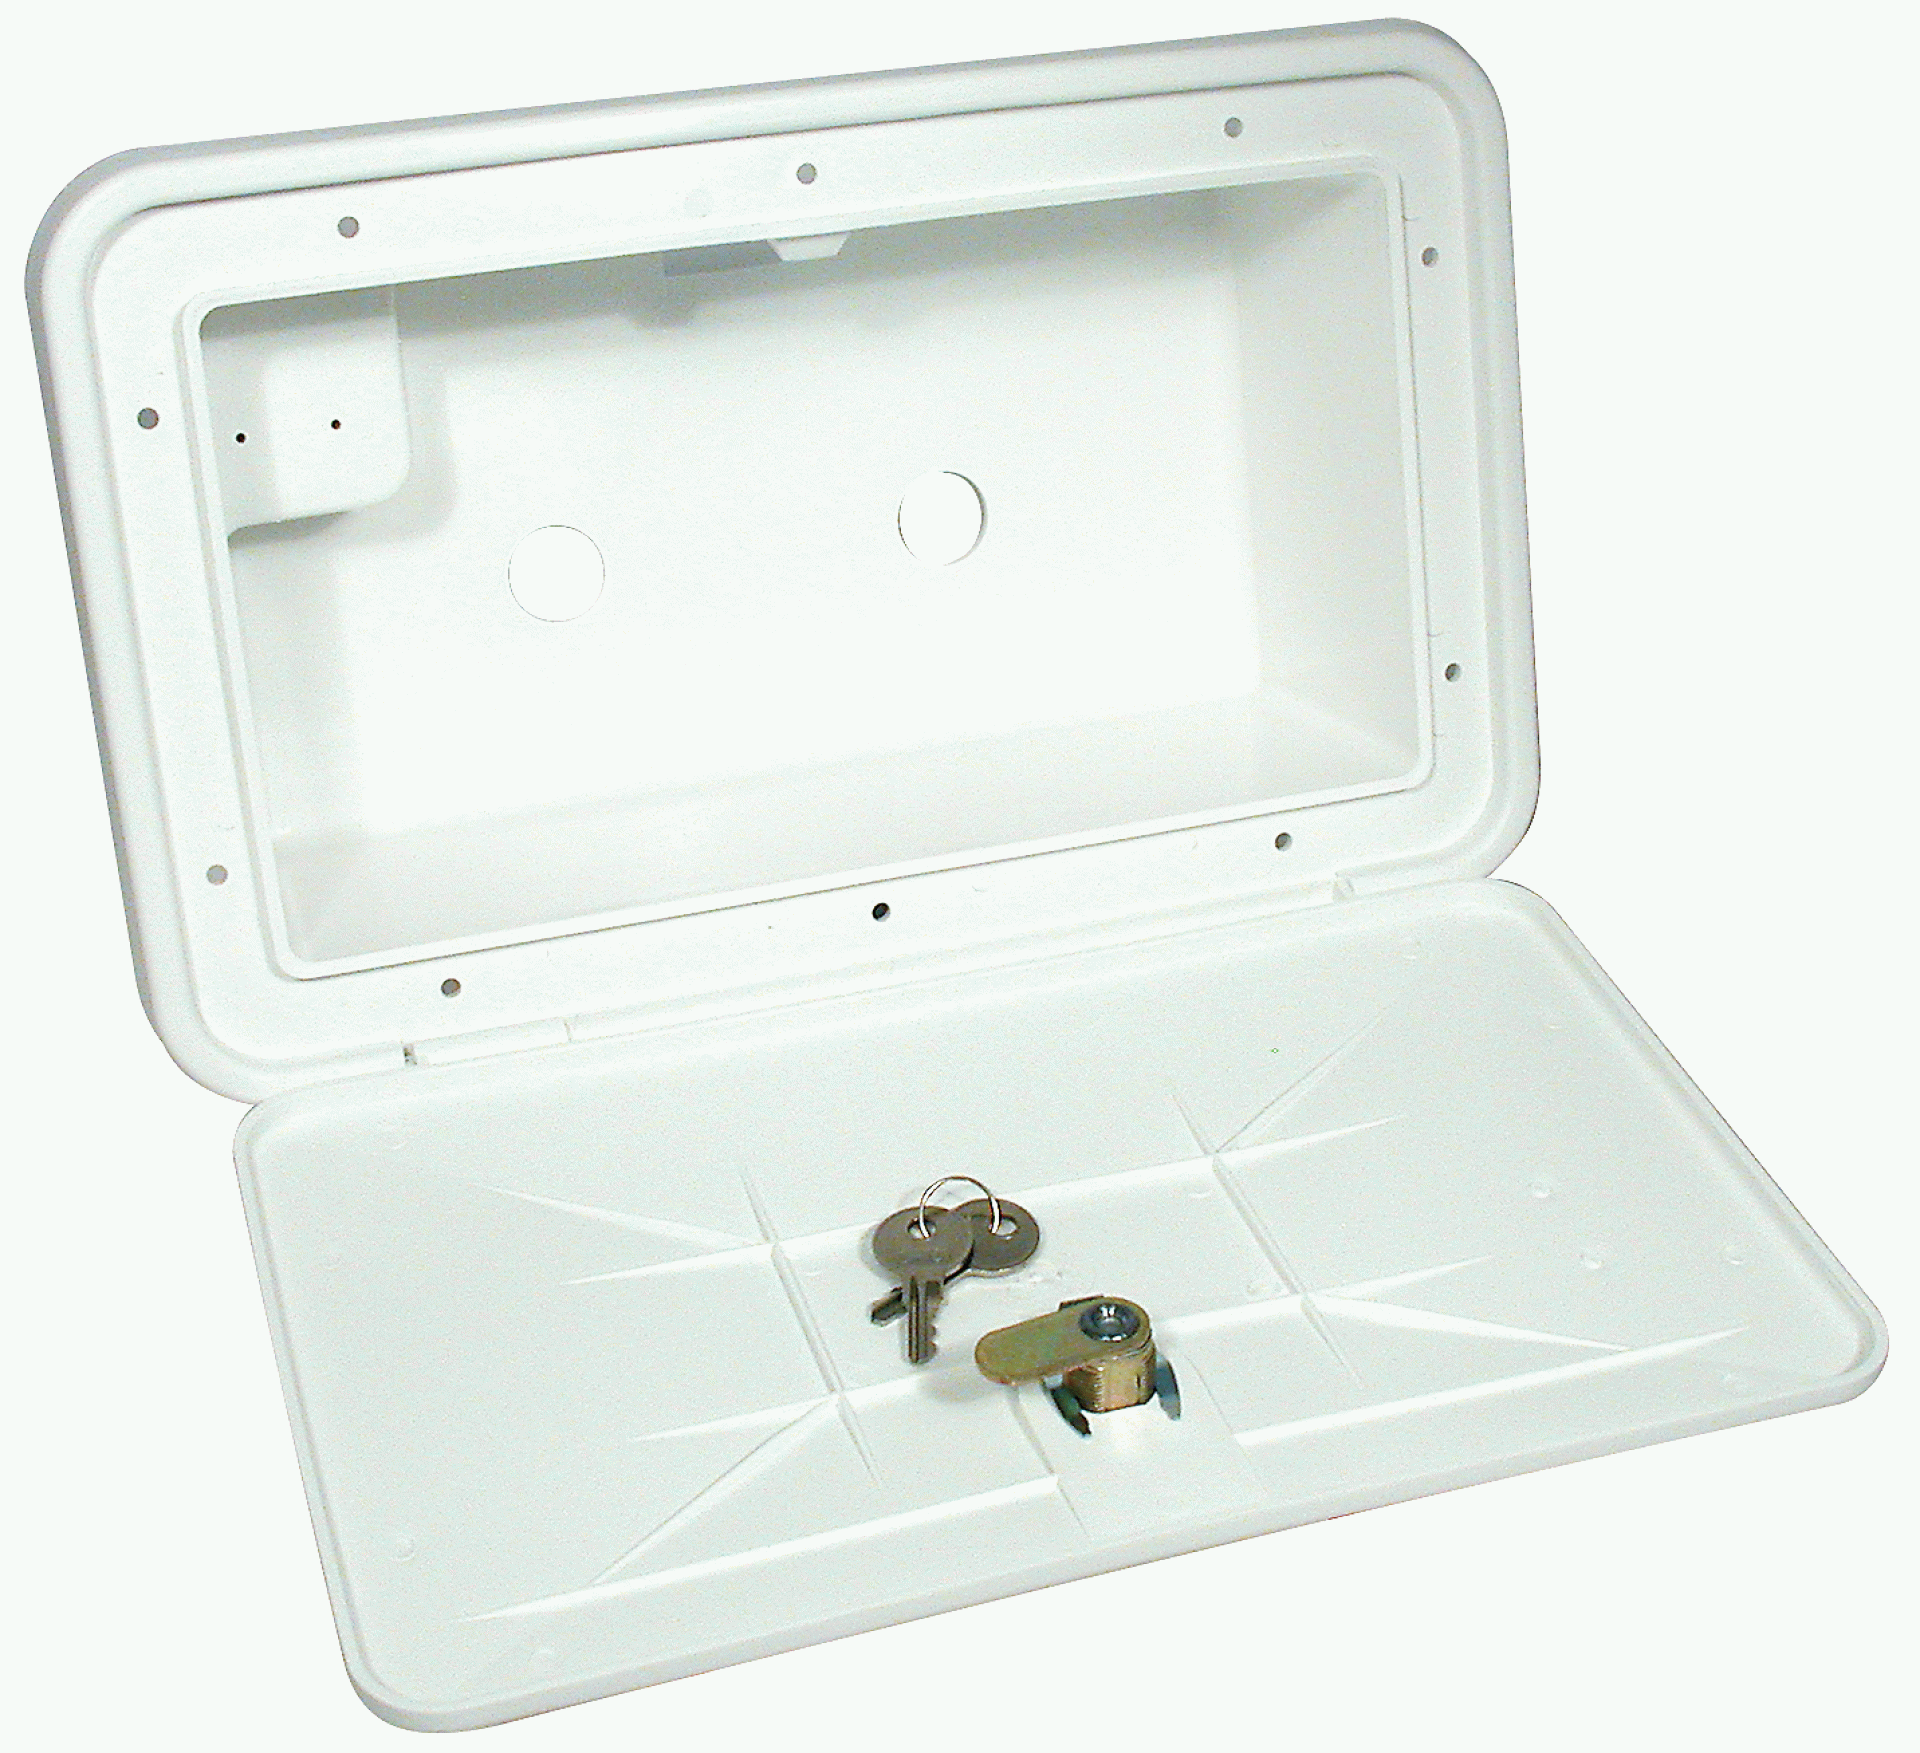 PHOENIX PRODUCTS INC. | PF267004 | Exterior Shower Box Replacement - w/ Door Lock and Key - White